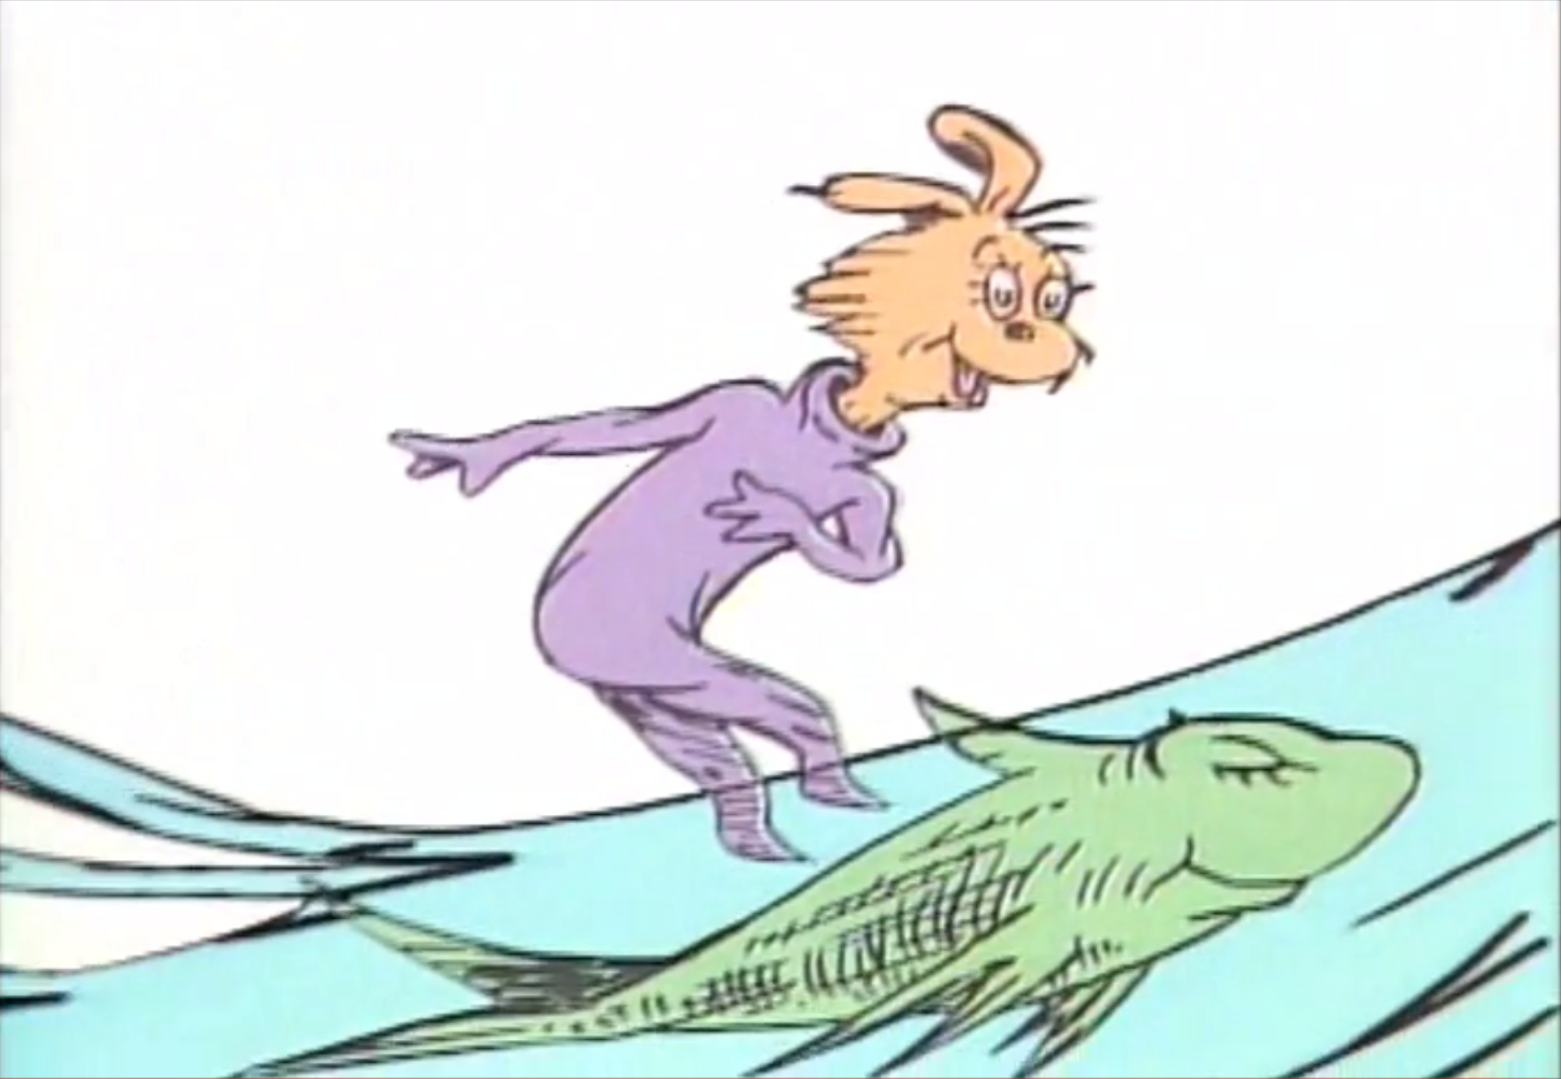 Image - Marvin K. Mooney Will You Please Go Now! (20).png - Dr. Seuss Wiki